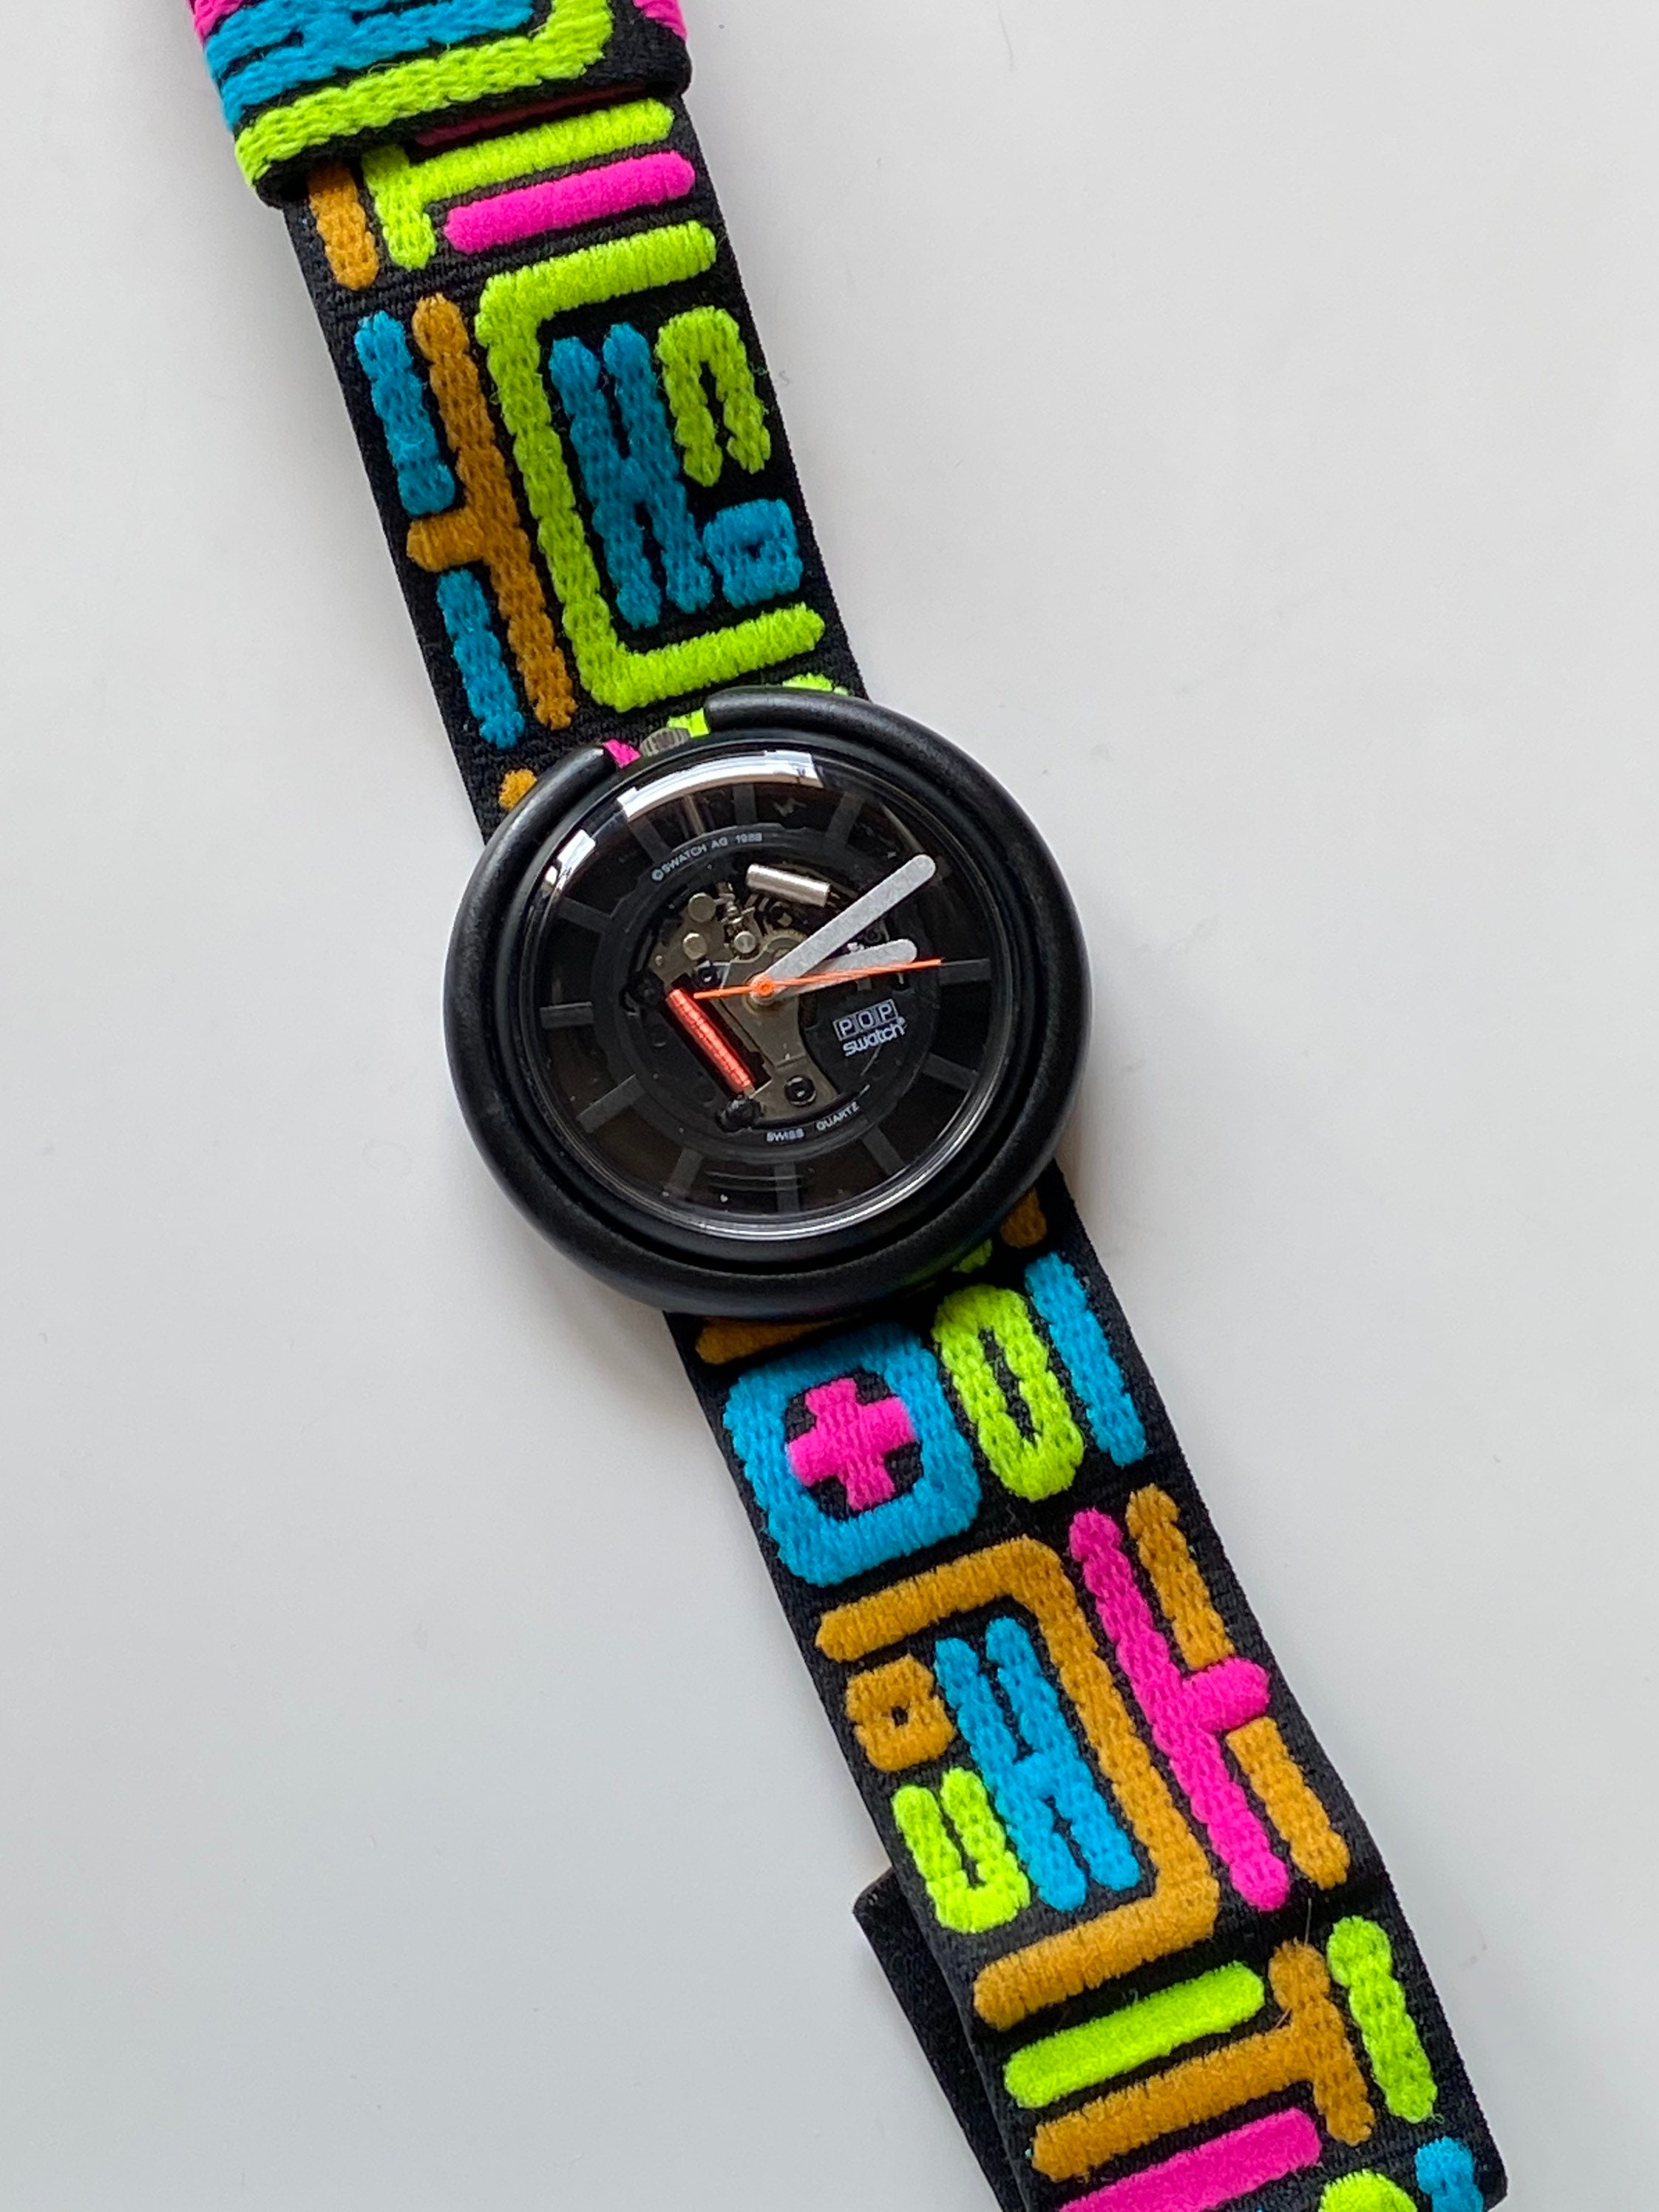 New 1989 Pop Swatch Watch Vintage FLUO MEX PWBB117 colorful skeleton dial  running Mexican colors gorgeous collectible